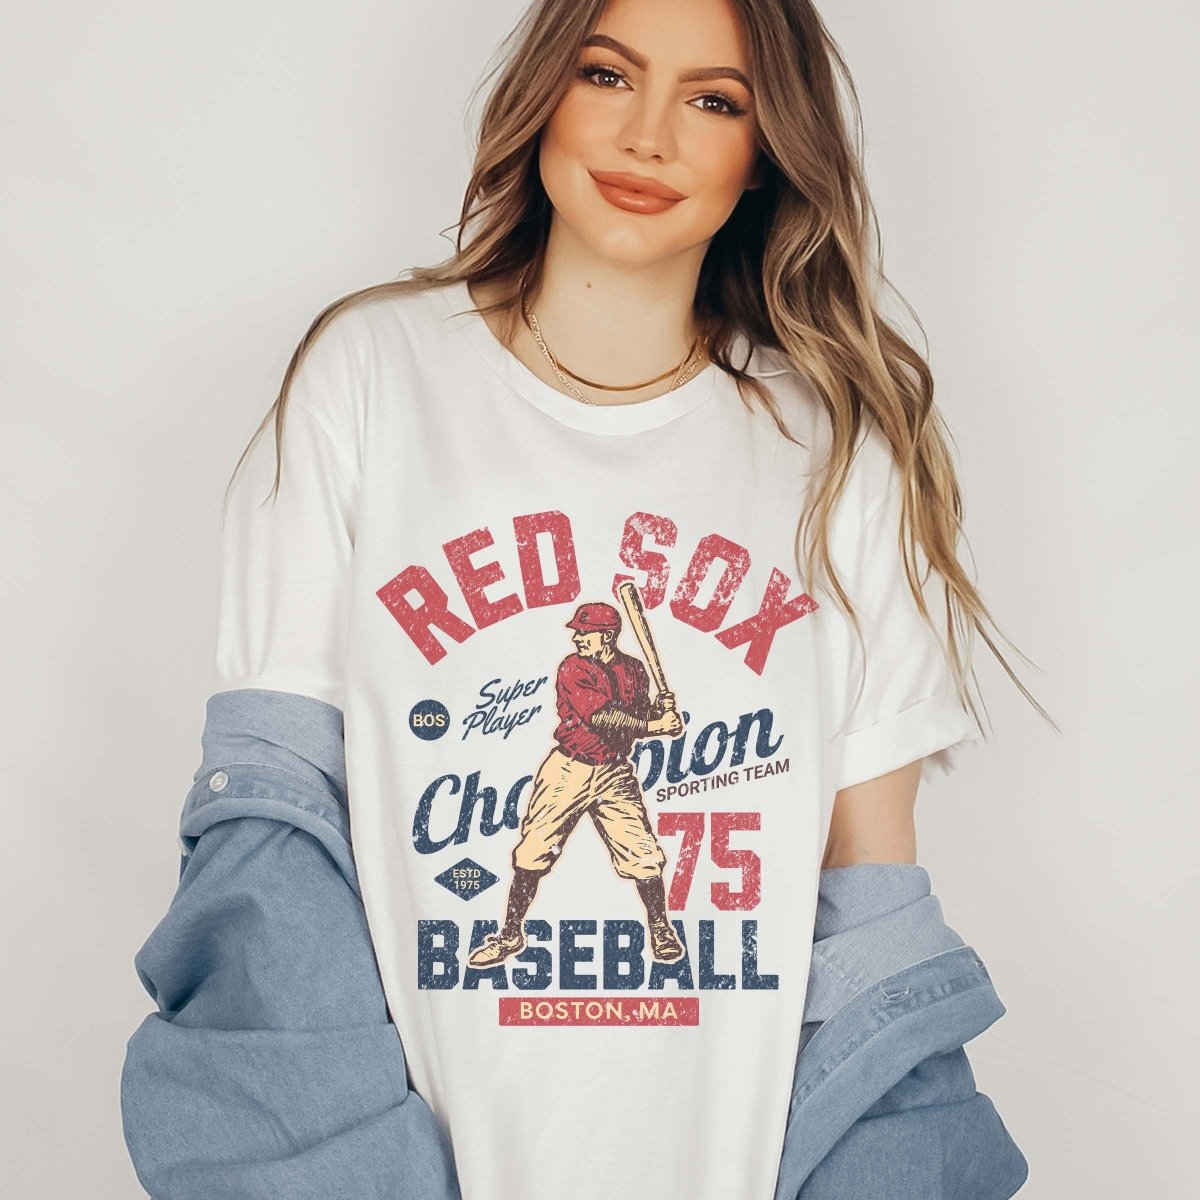 Red Sox Vintage Baseball Team Wholesale Tee - Quick Shipping - Limeberry Designs